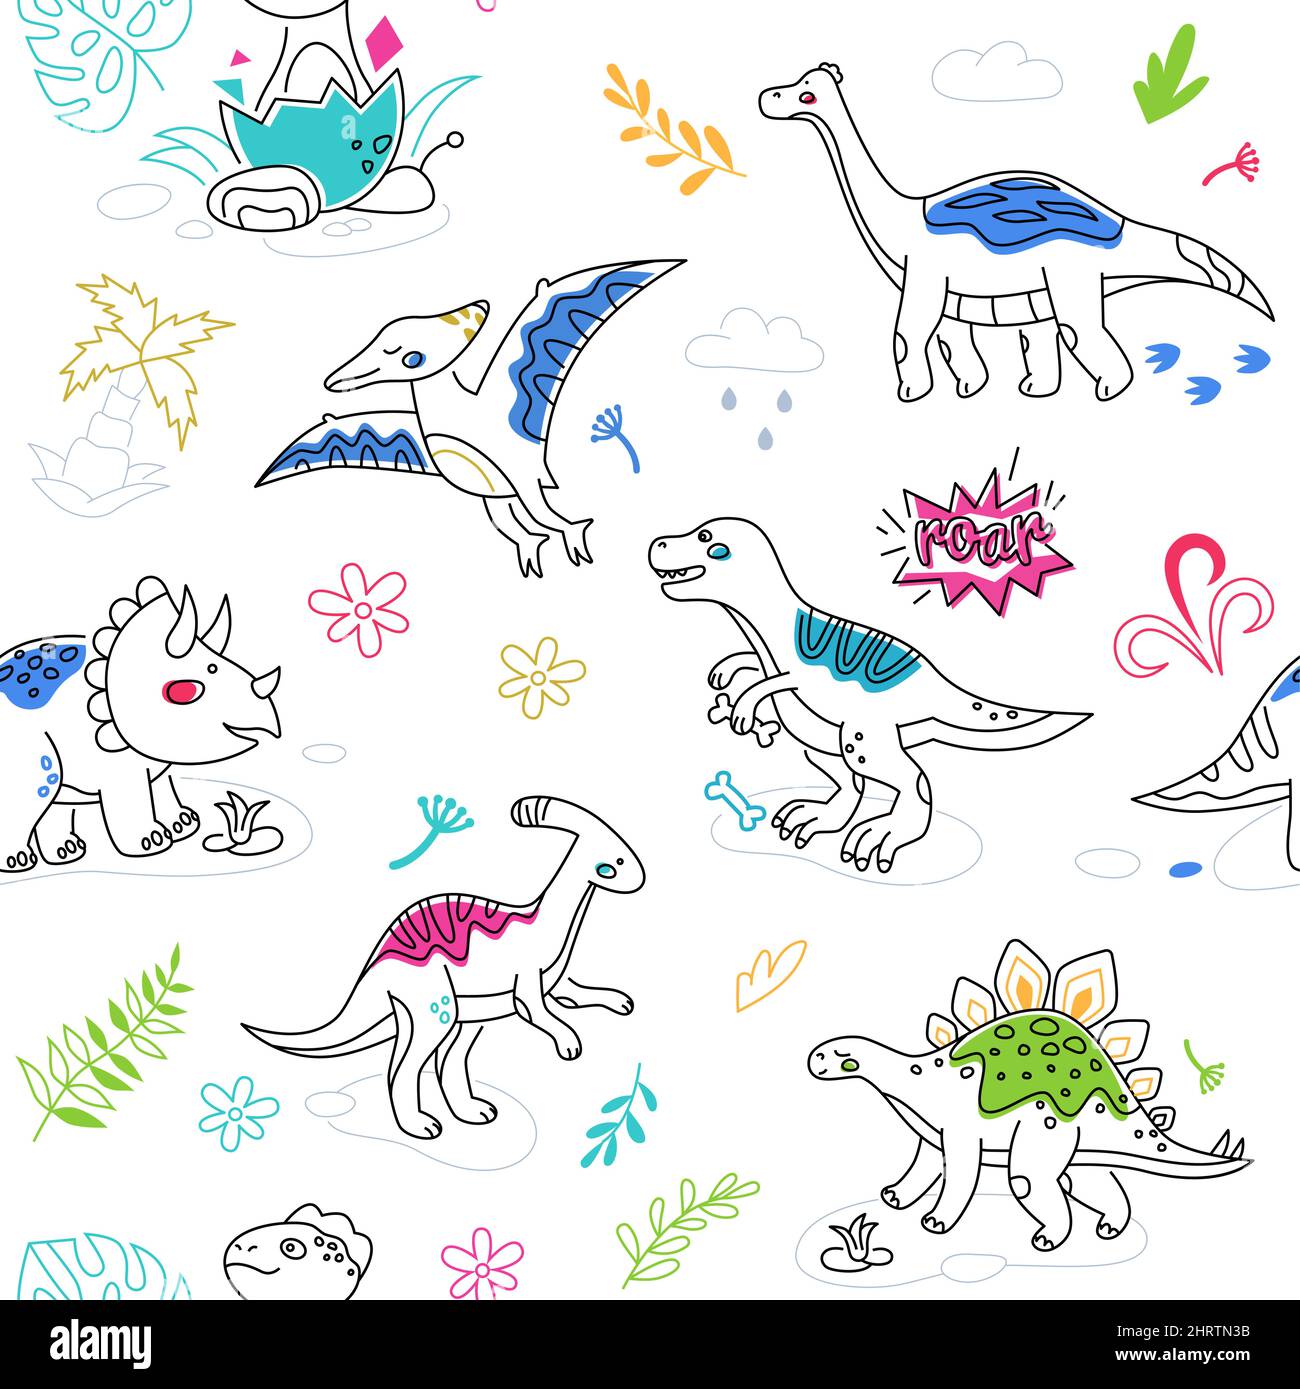 Dinosaur species - line design style colorful pattern on white background. Funny images of dinosaurs. Jurassic world and jungle. Explore animals and p Stock Vector